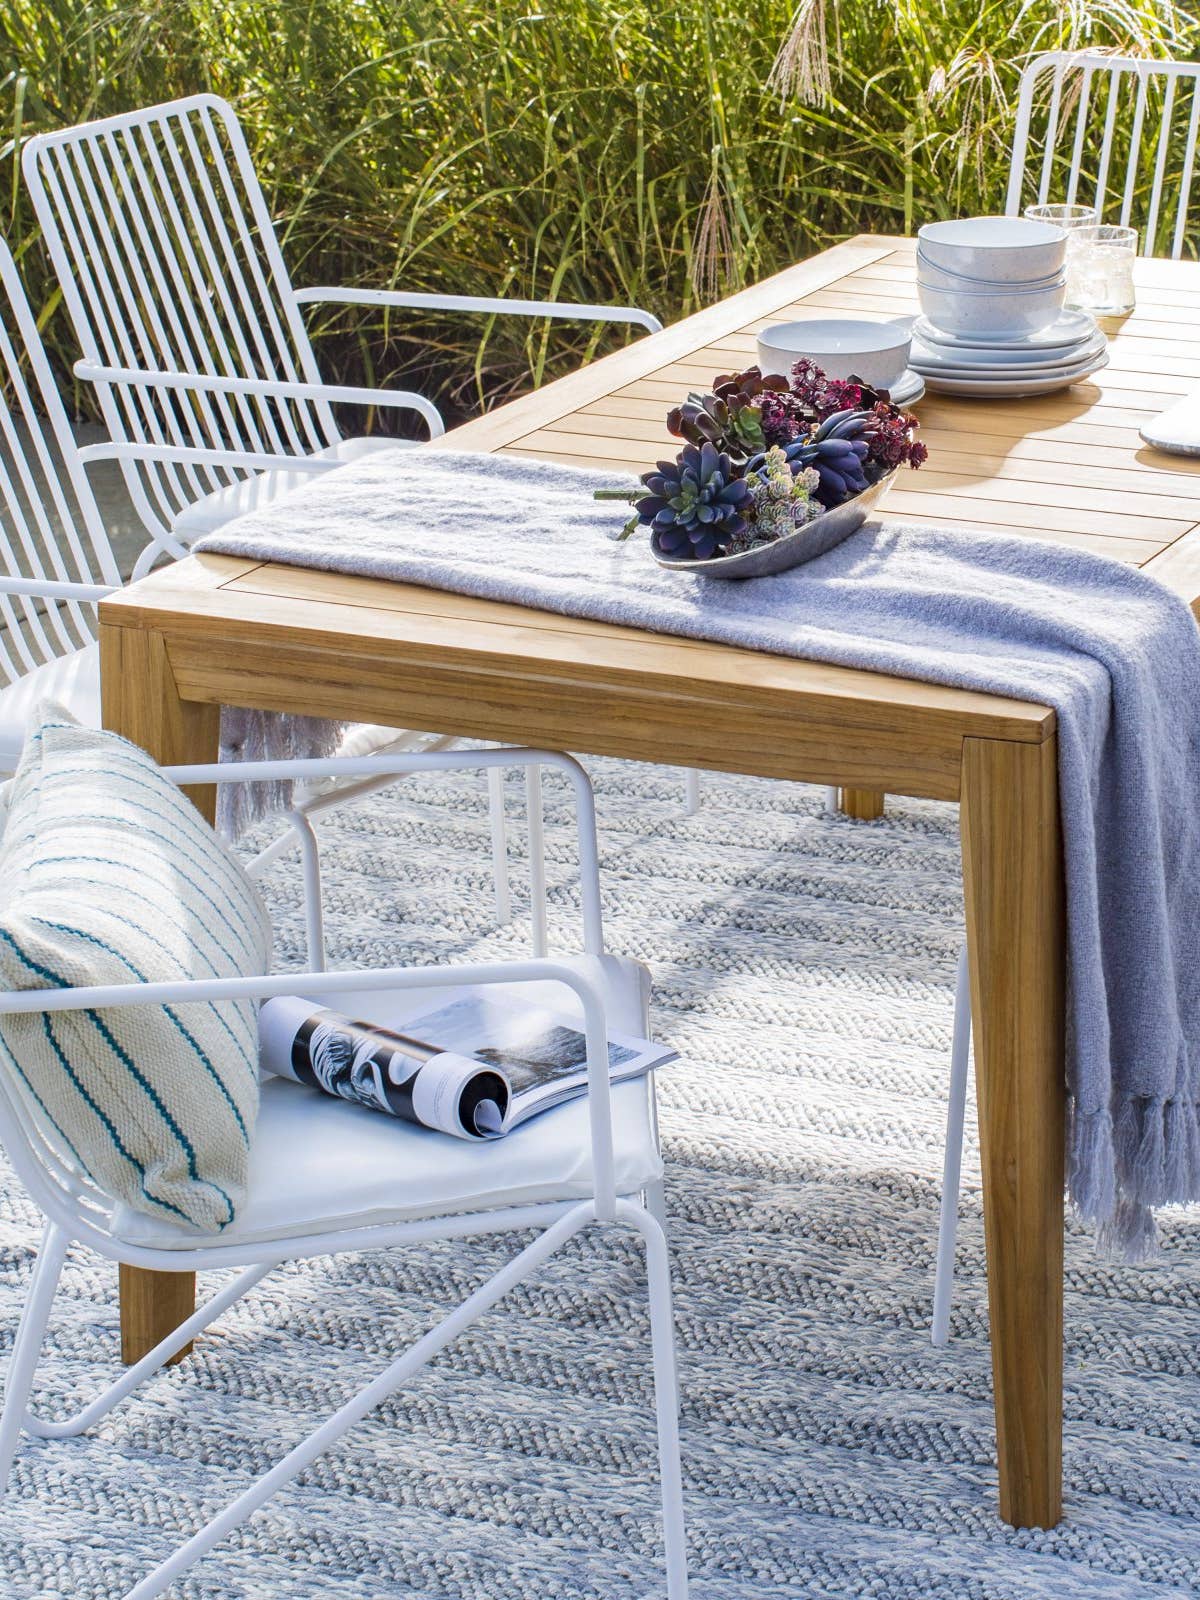 We’ve Got Your Outdoor Entertaining Cheat Sheet Right Here